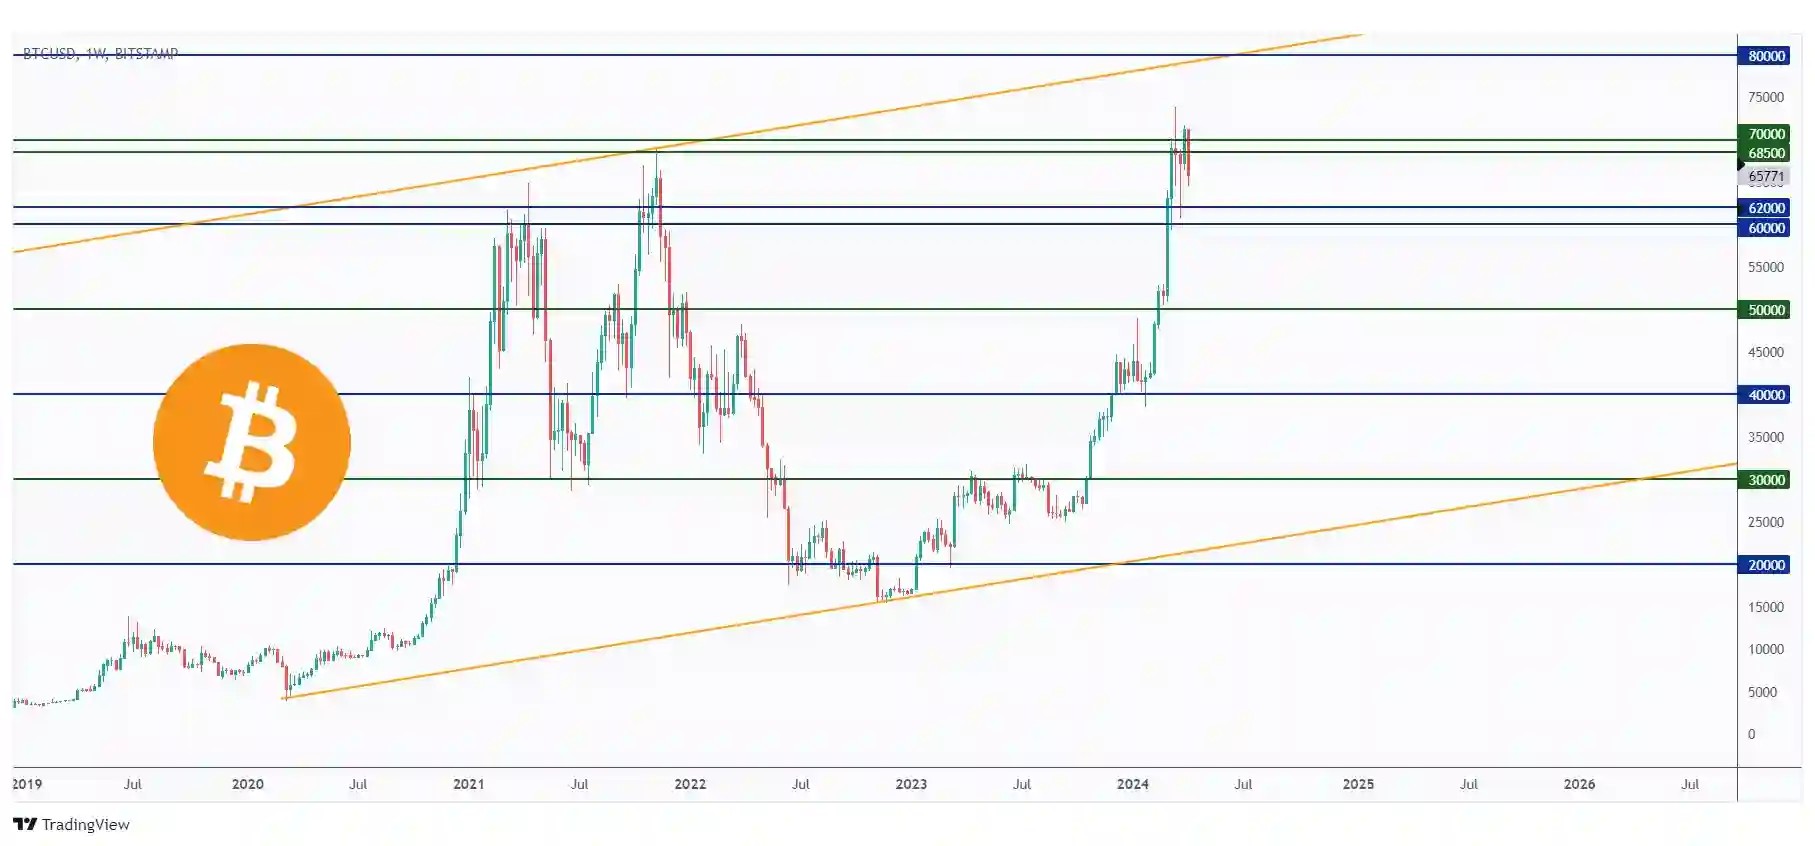 BTC weekly chart hovering within a tight range between $60,000 and $70,000.